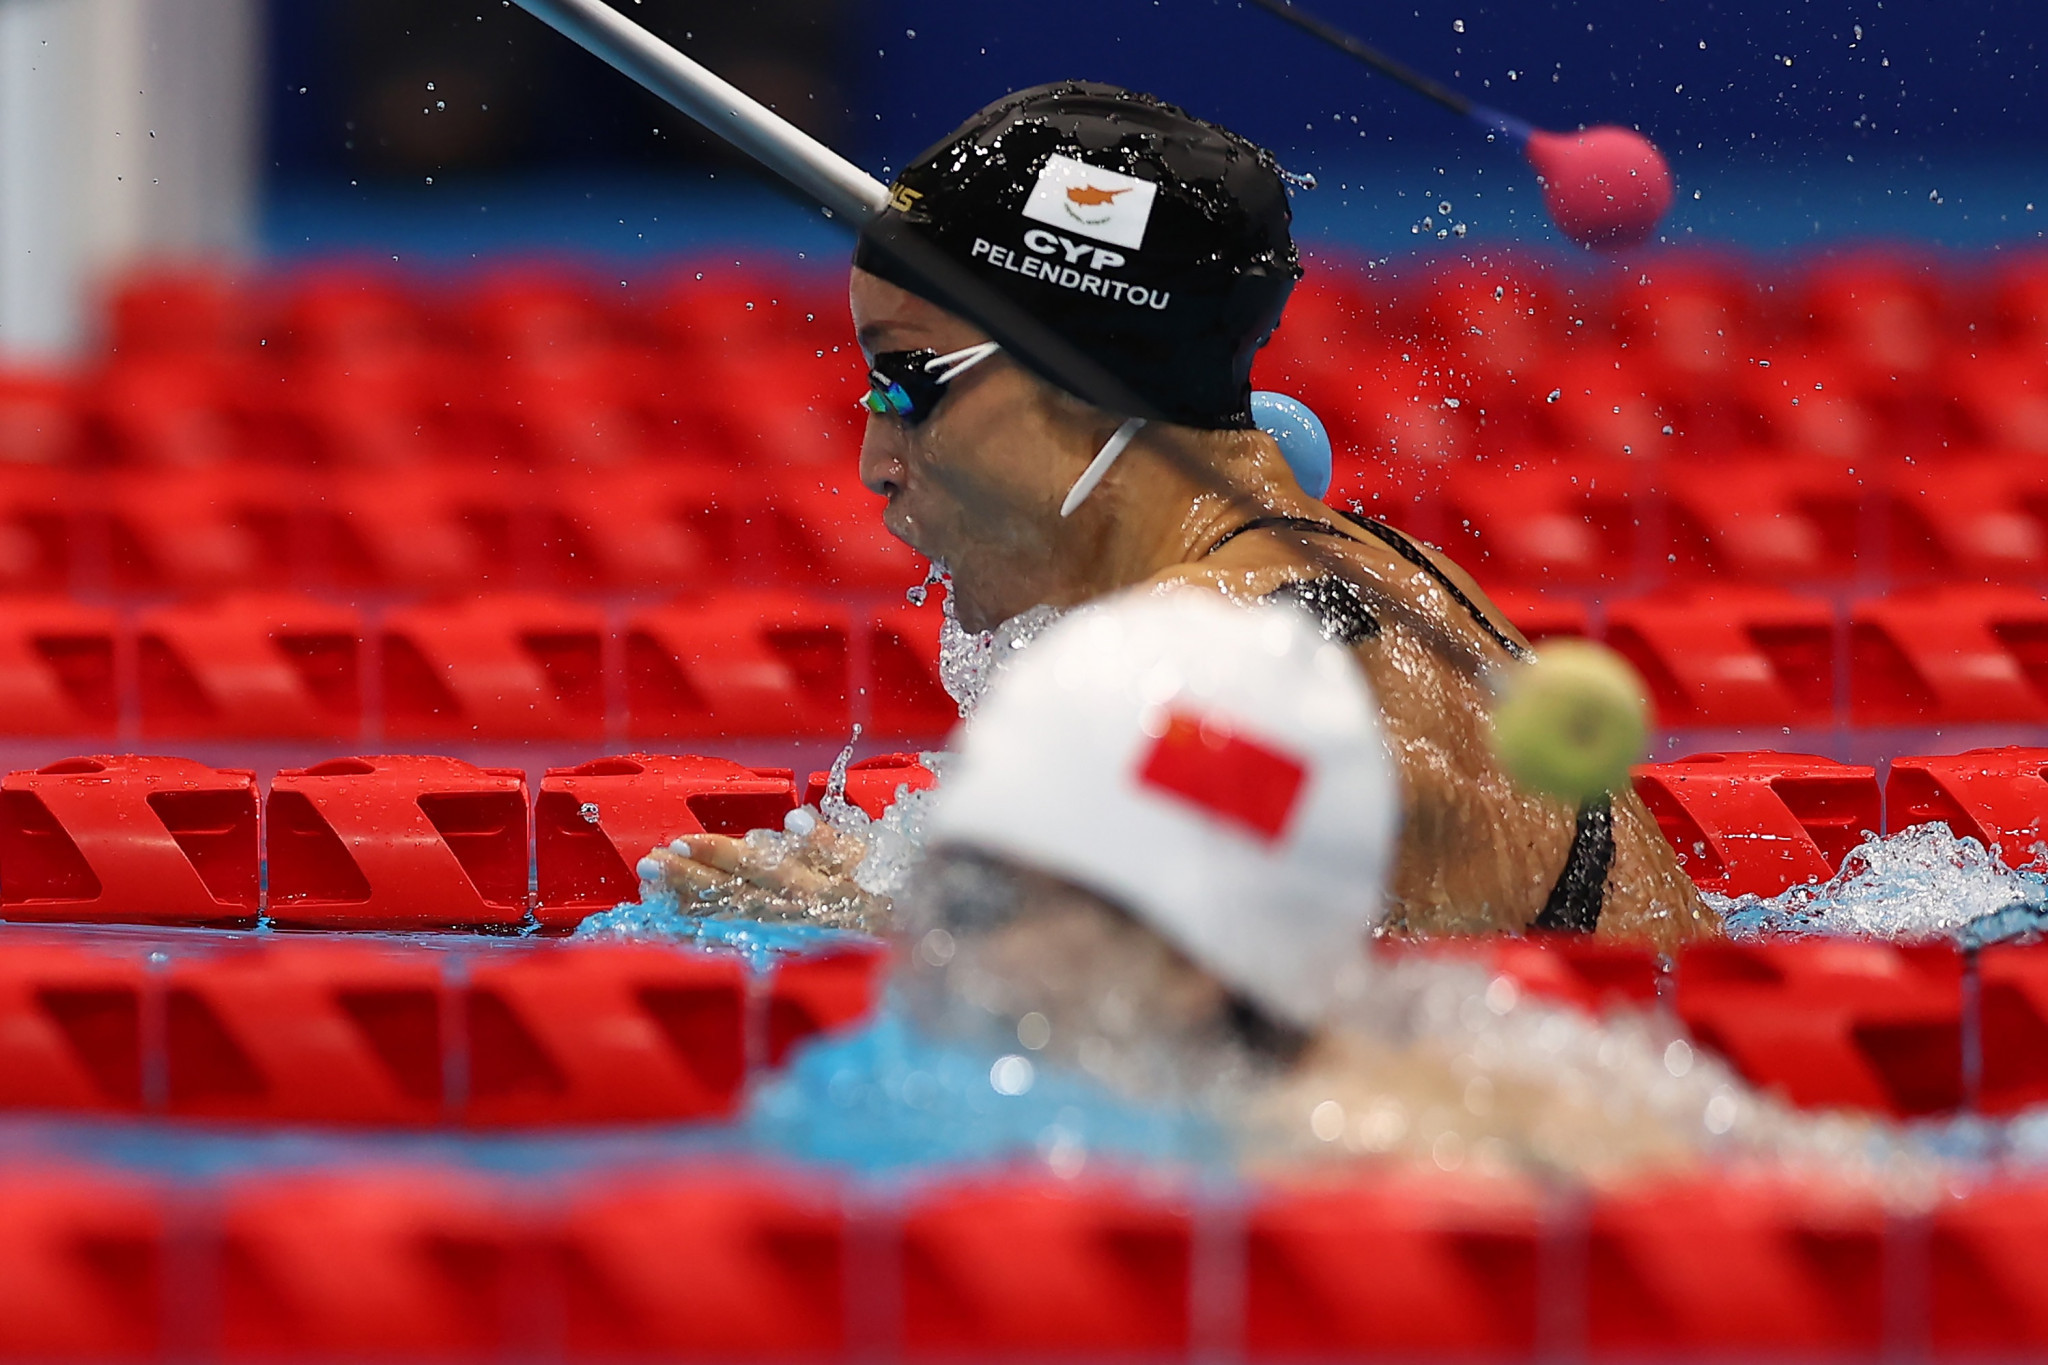 Karolina Pelendritou battled it out with Ma Jia for gold ©Getty Images